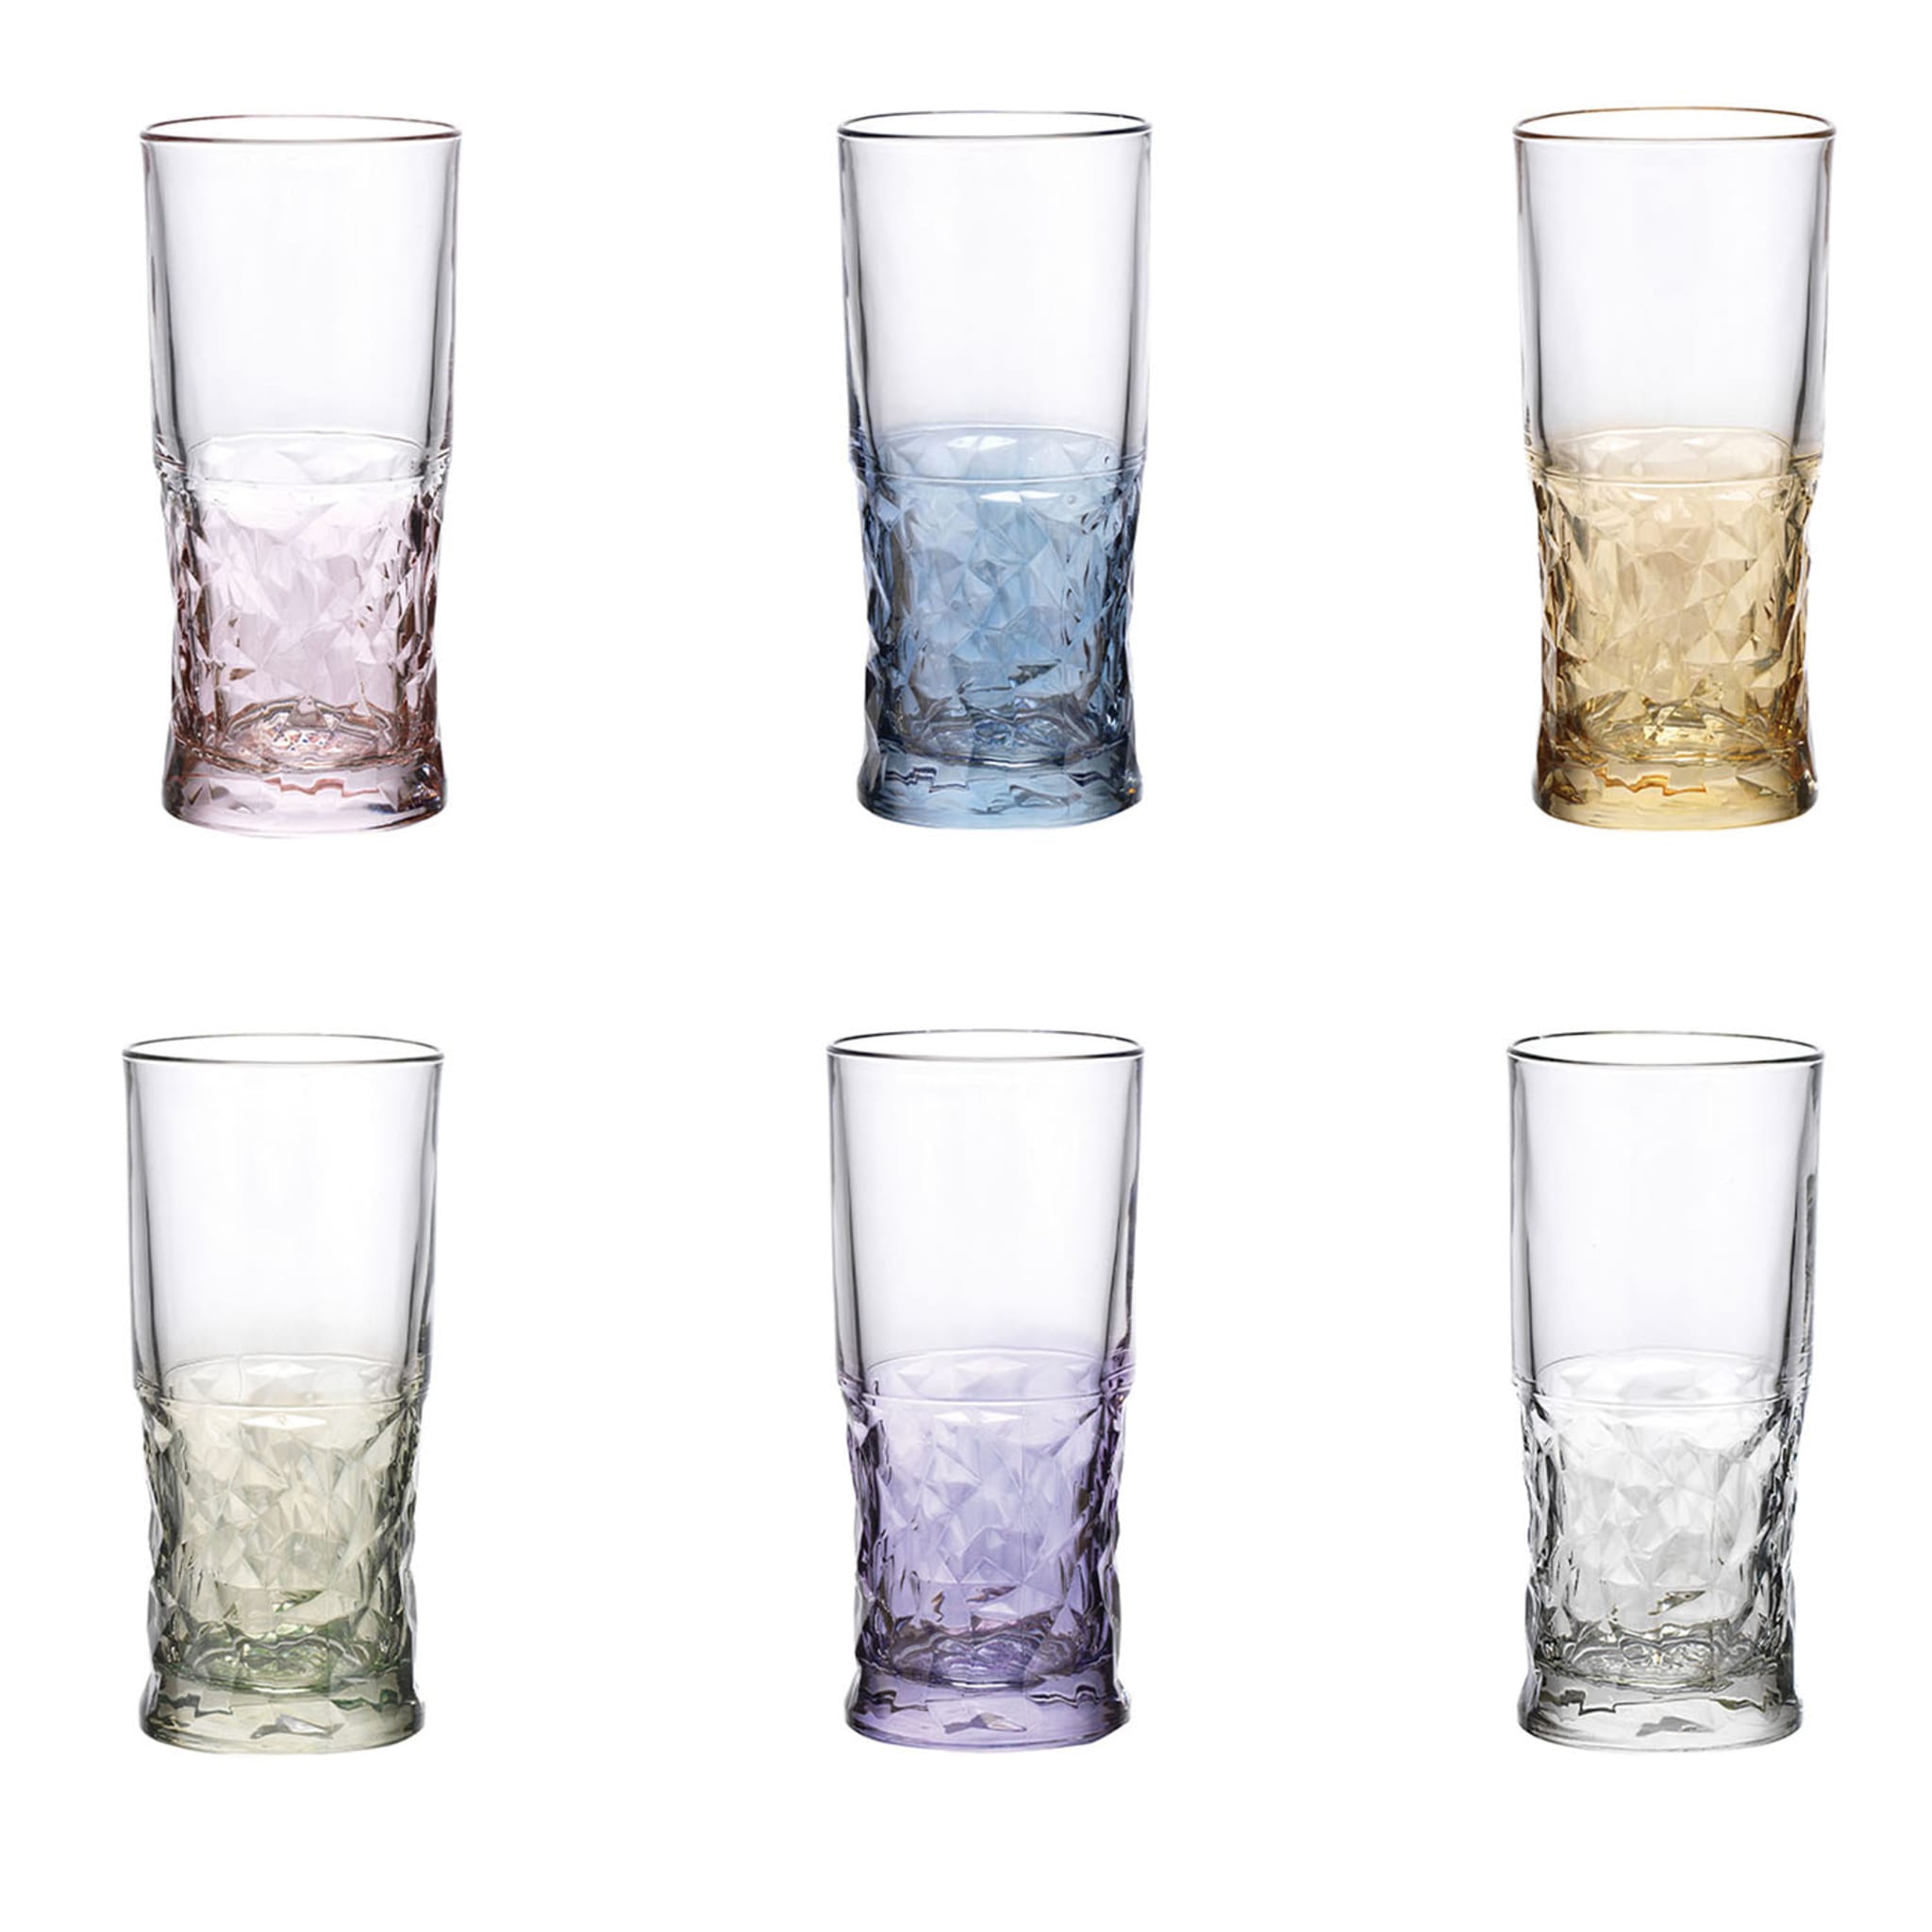 Sound 02 Polychrome Set of 6 Faceted Drinking Glasses